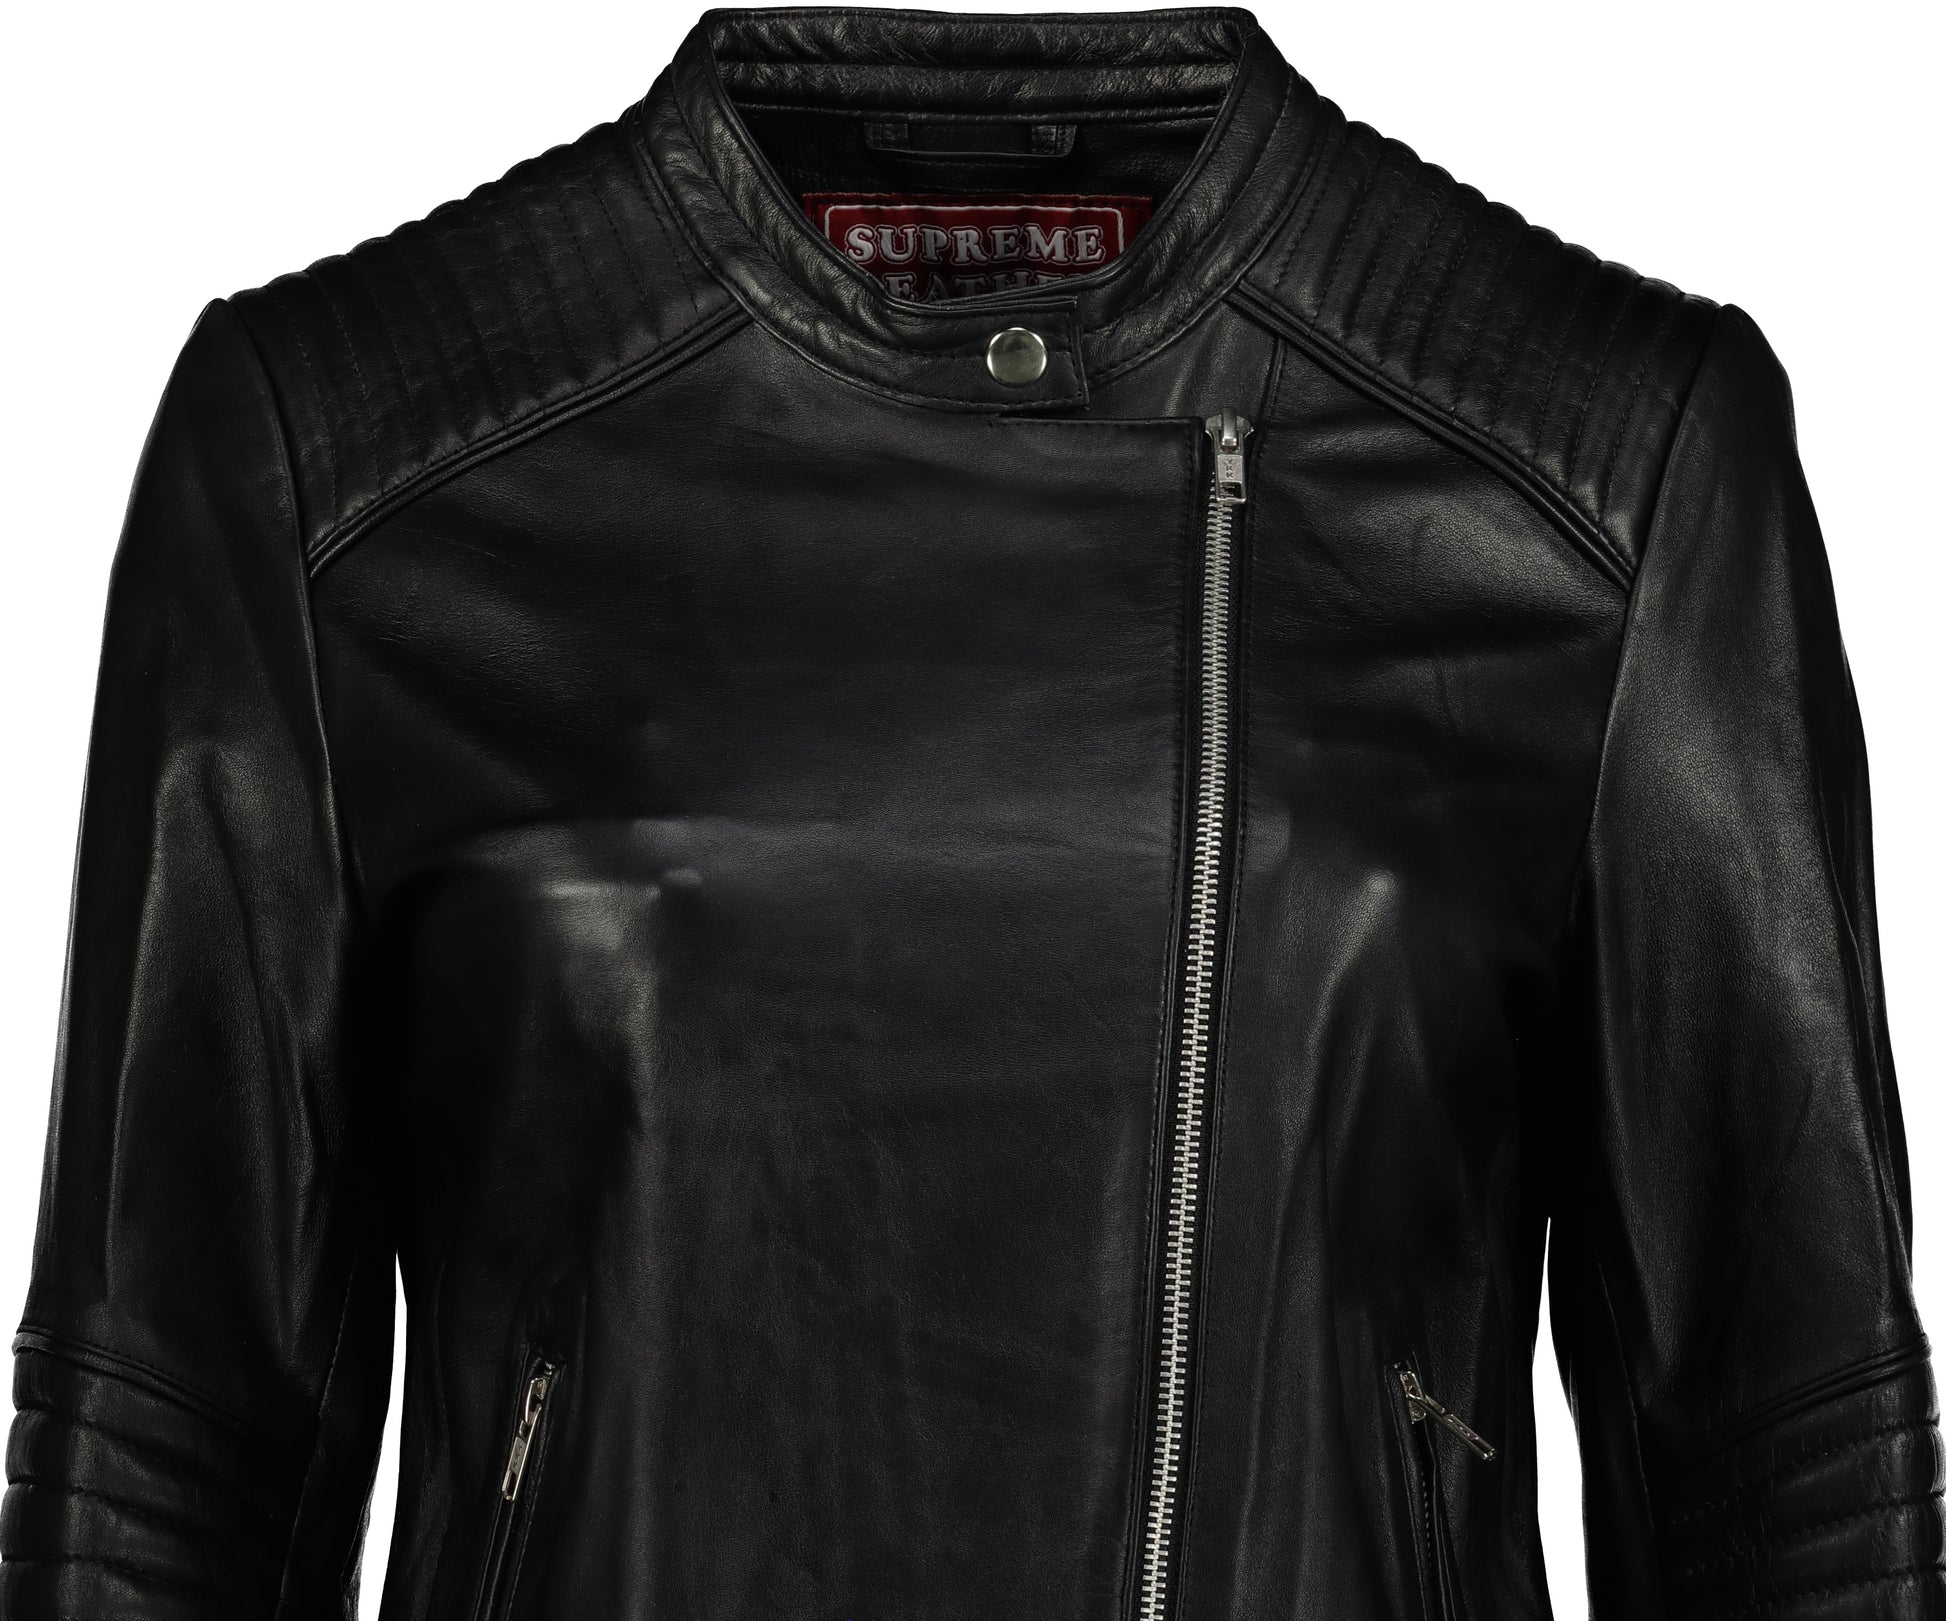 Woman jacket mod. Zara in genuine Black leather 100% made in Italy